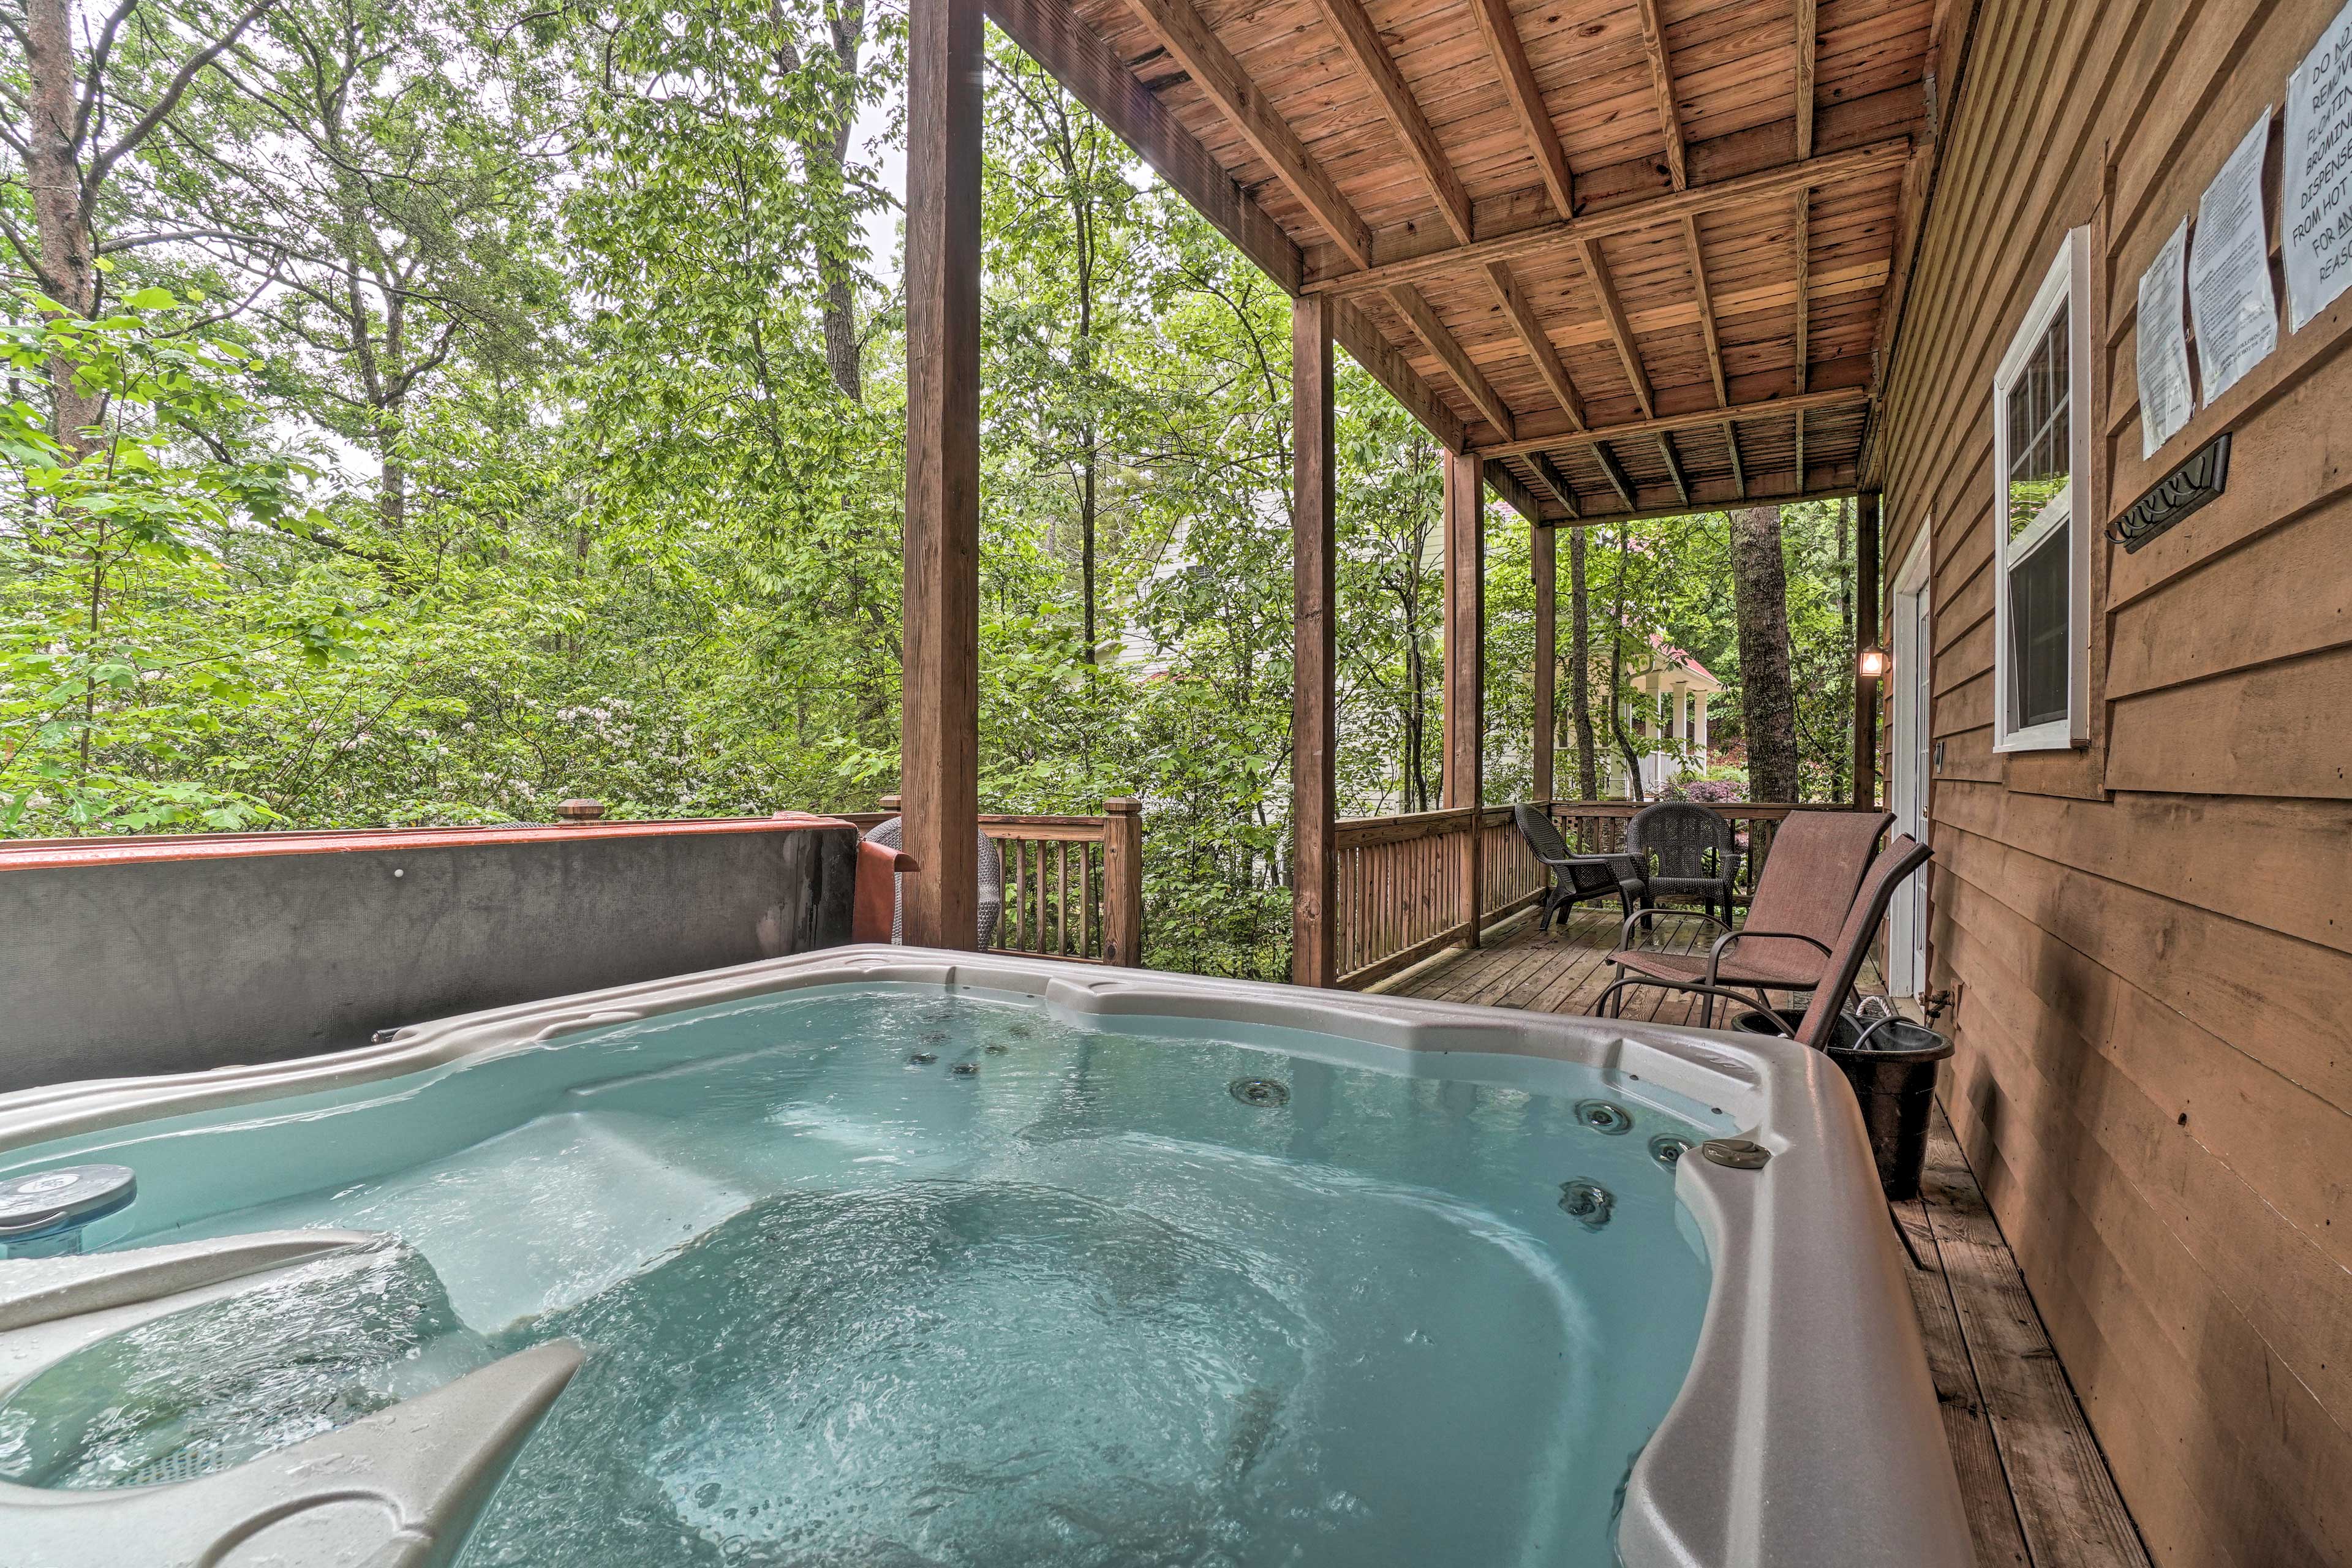 Sip and dip in the private hot tub.